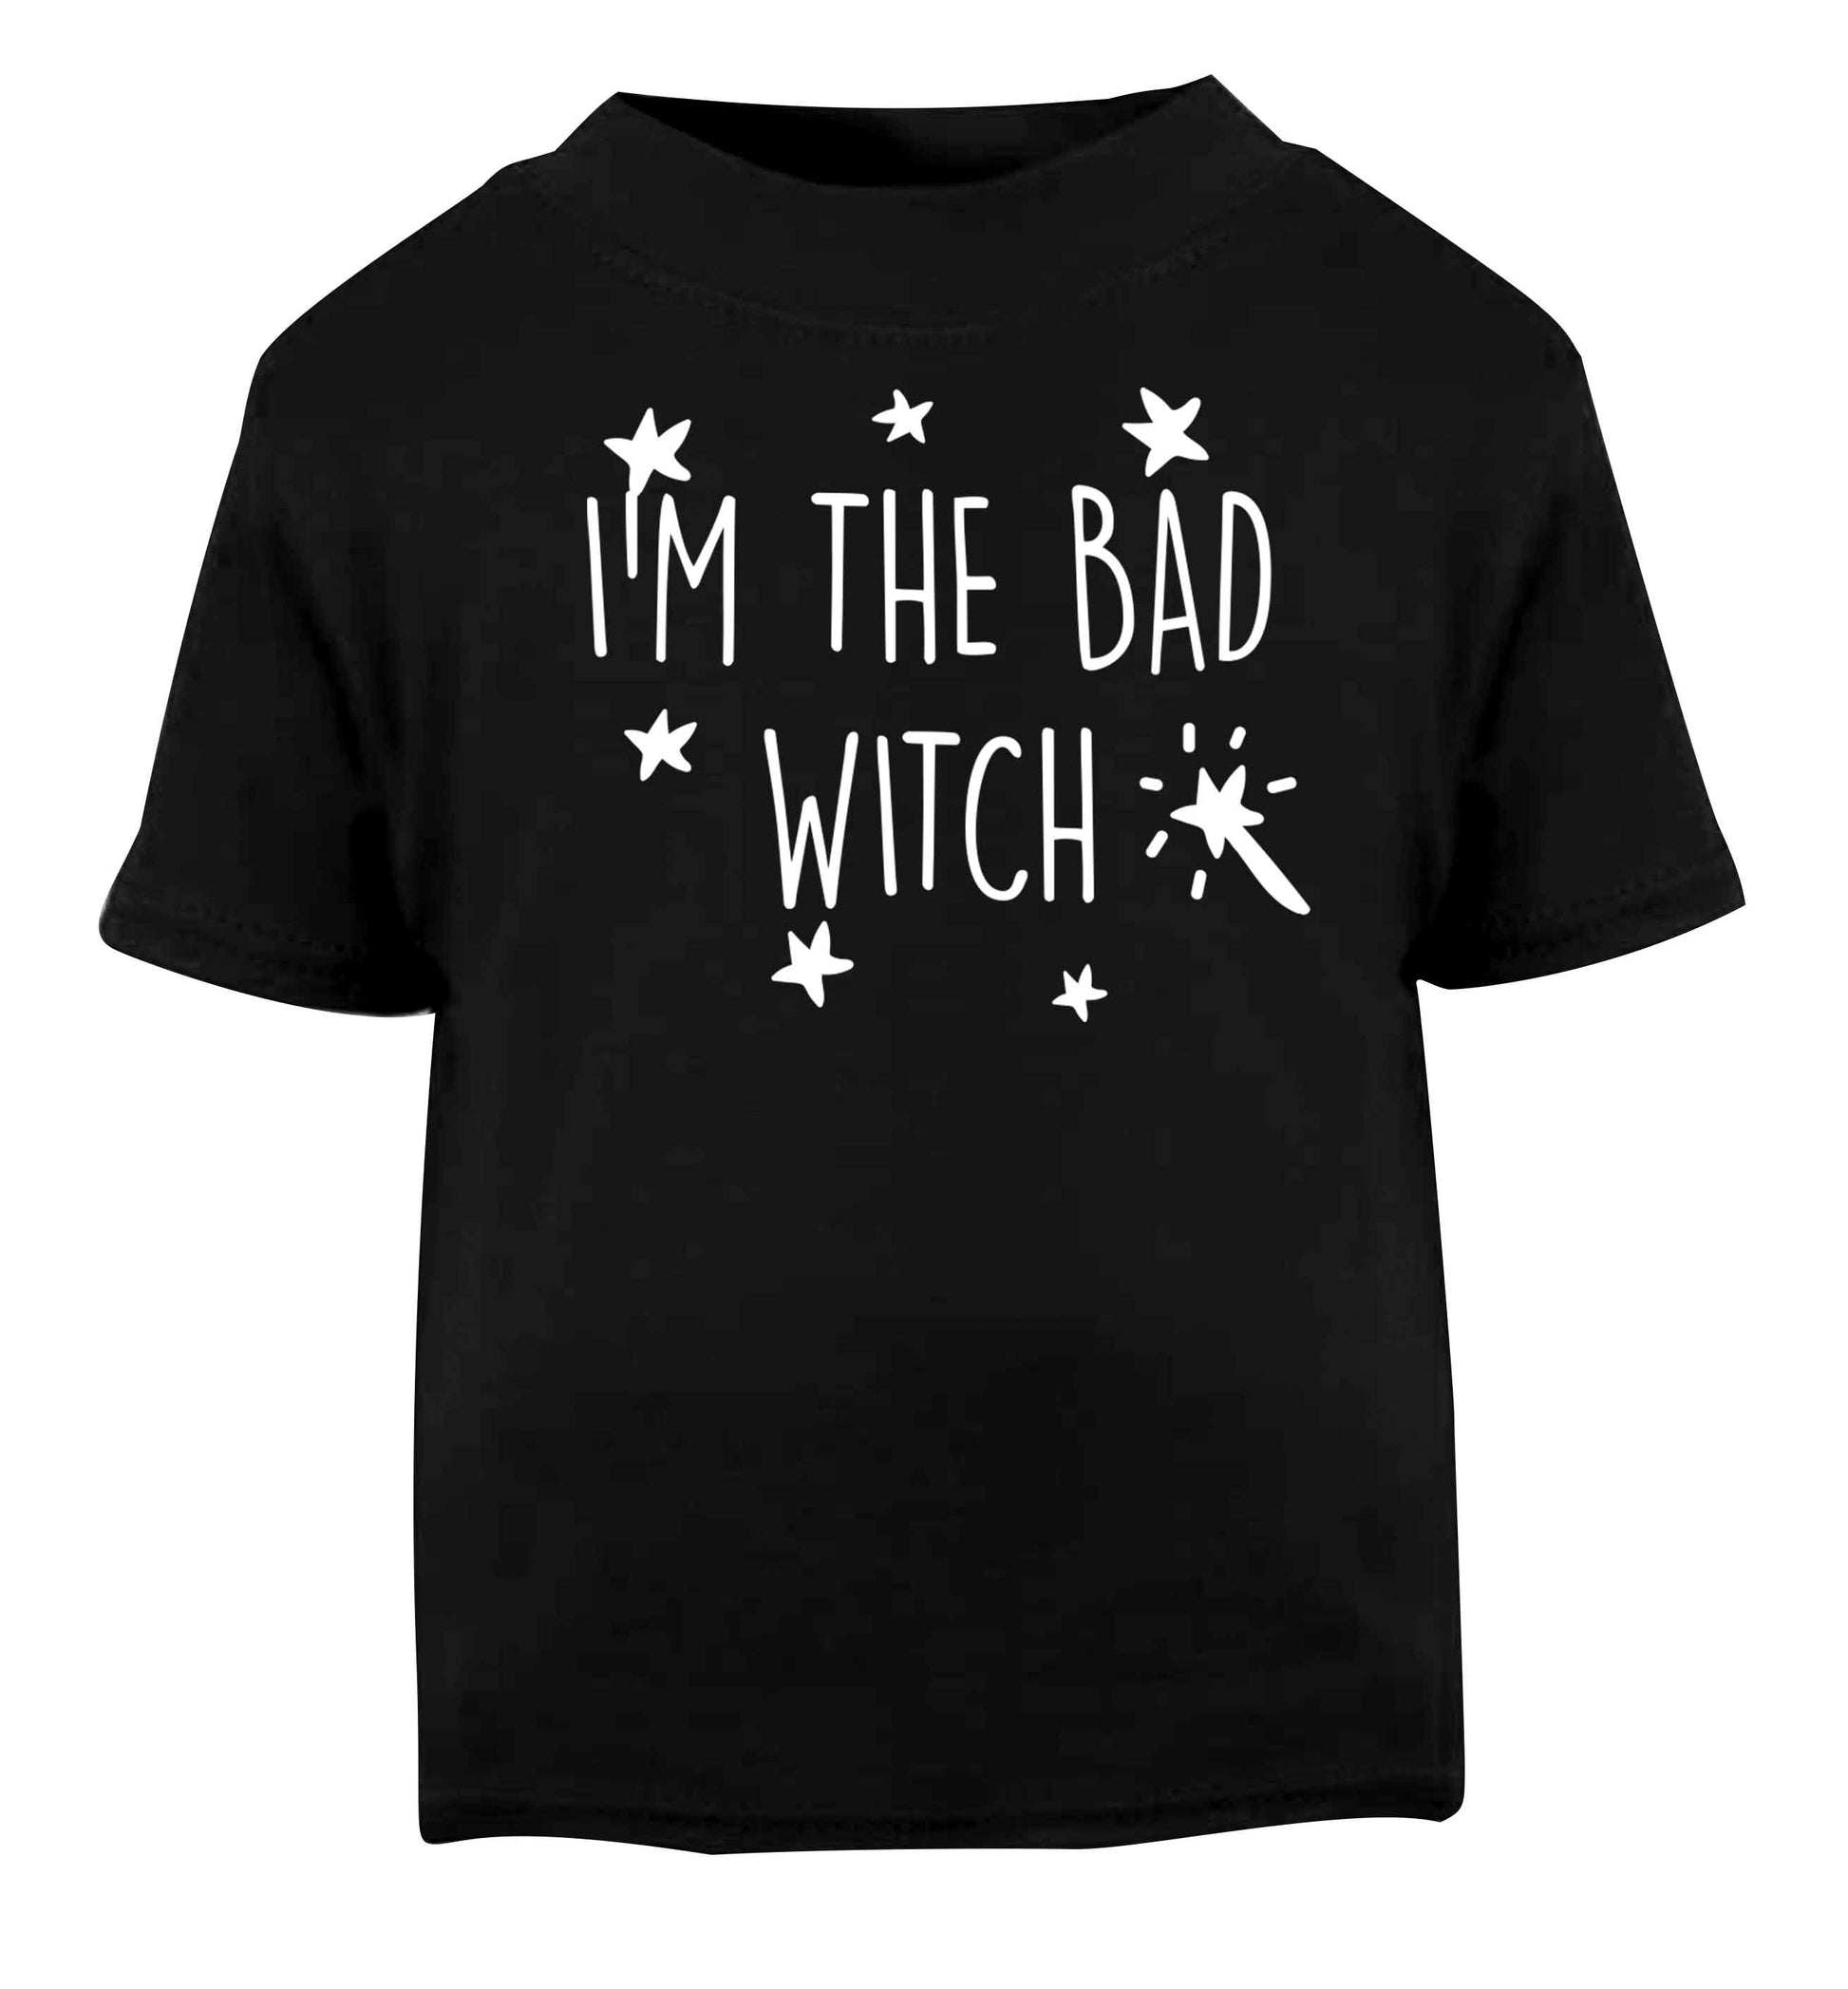 Bad witch Black baby toddler Tshirt 2 years